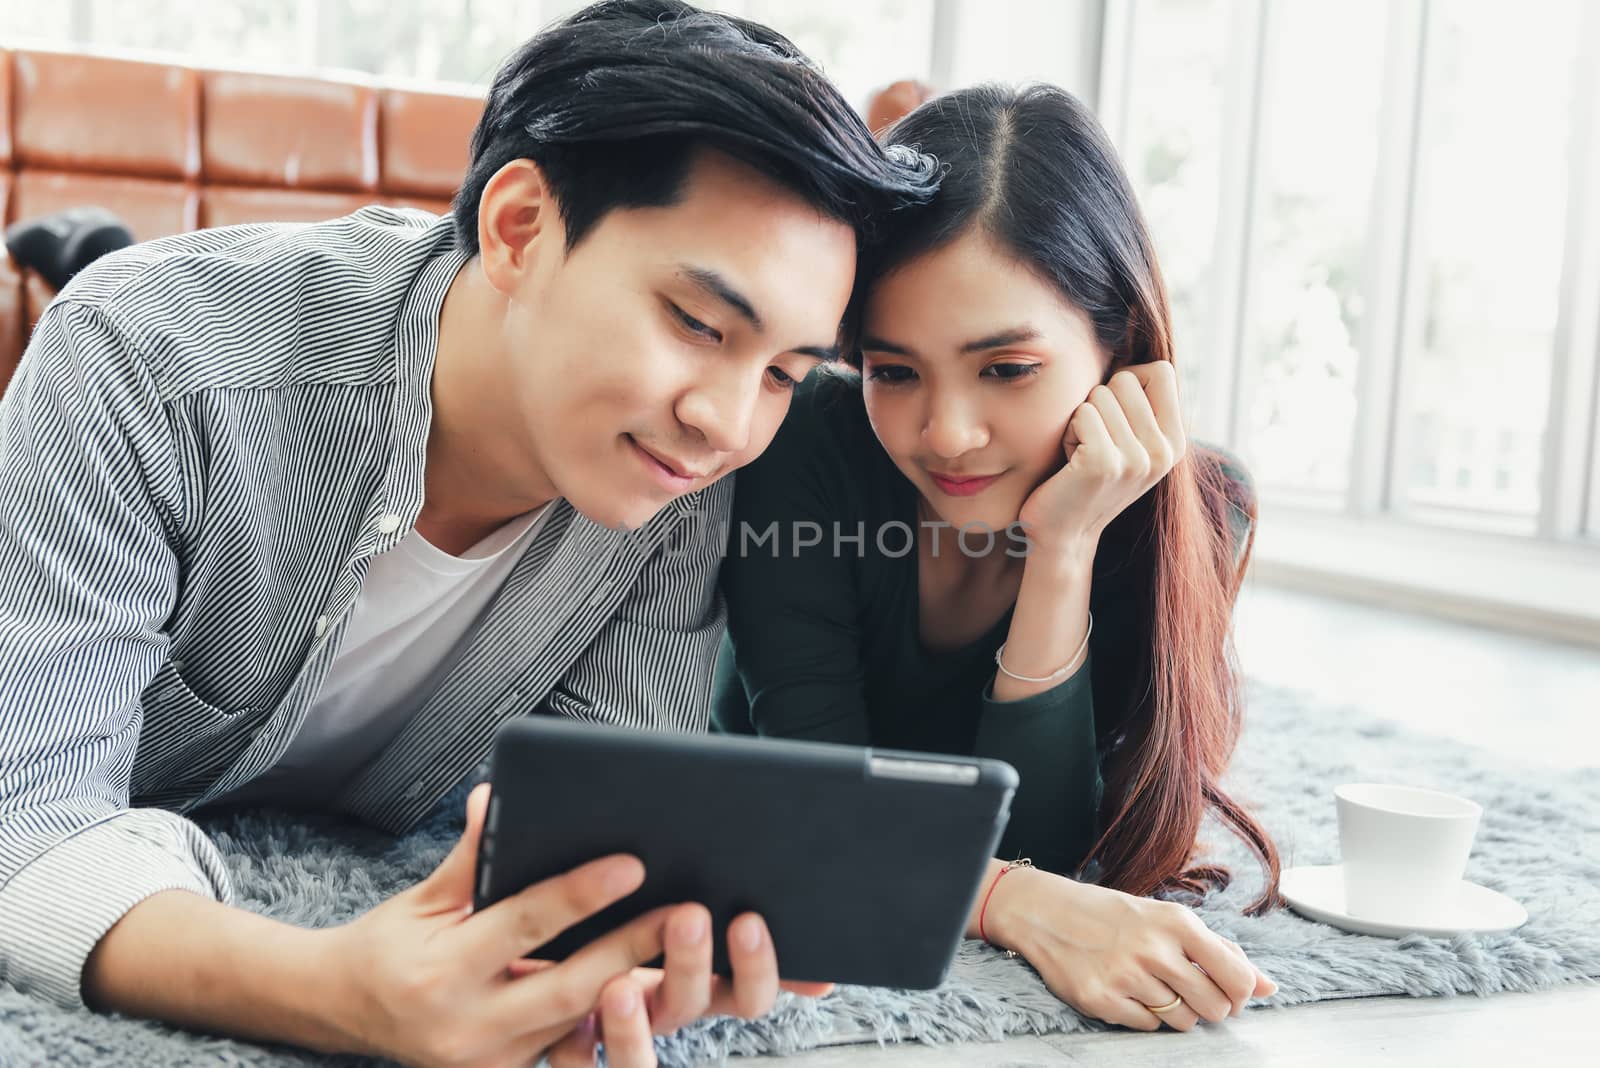 Young Couple Love Relax Enjoyment While Online Shopping on Electronic Tablet in Living Room, Portrait of Asian Couple Relaxing on a Couch During Shopping Online Togetherness. Relaxation/ Lifestyle